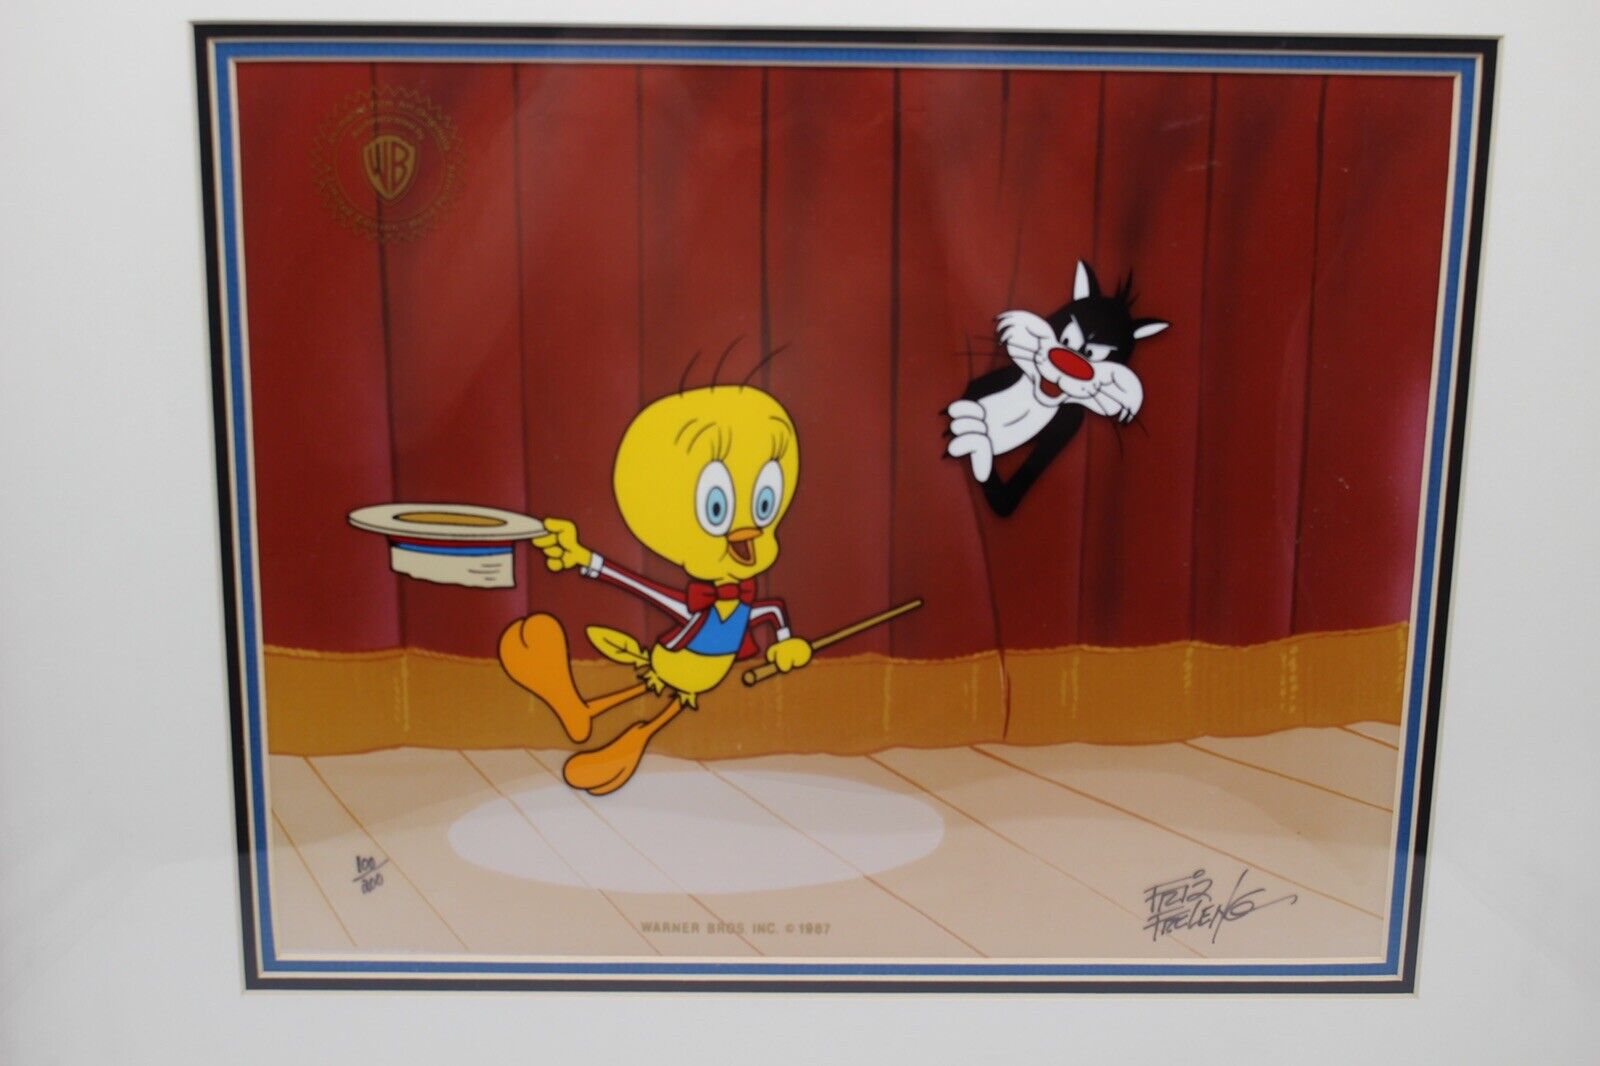 Show Stoppers (Tweety and Sylvester) - Friz Freleng 100/200